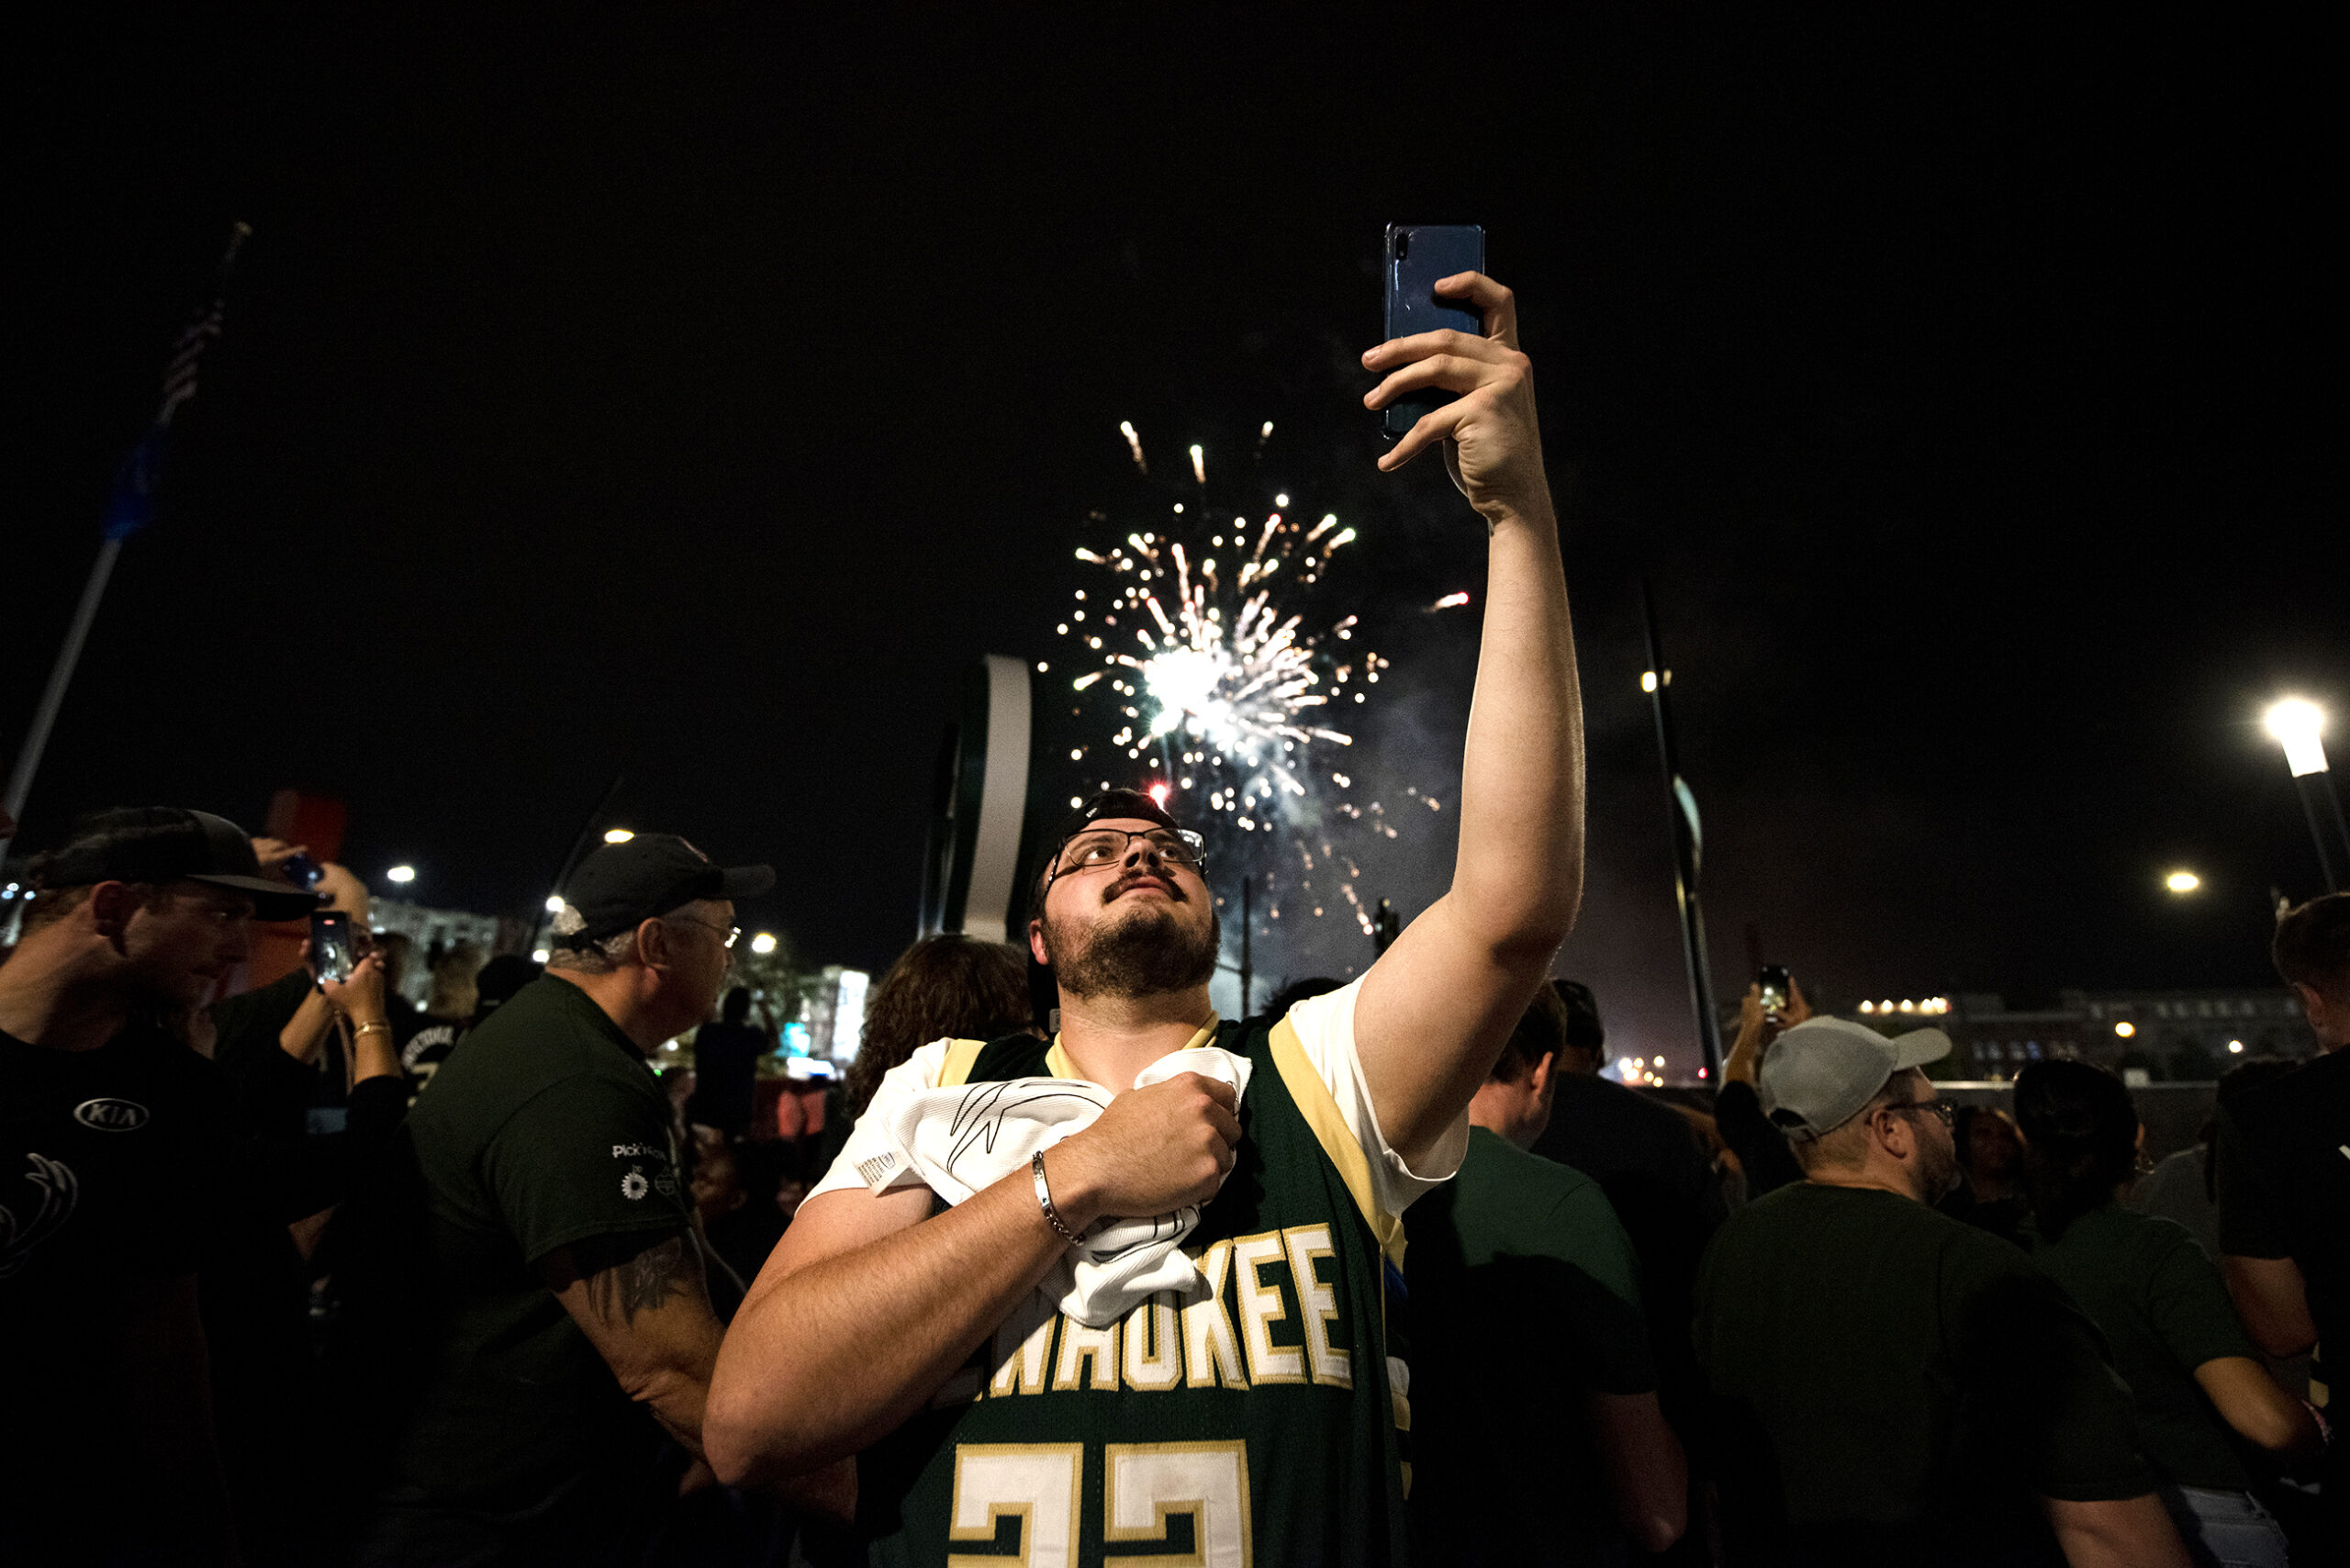 A fan in a Bucks jersey puts his hand over his heart as he records with his phone. Fireworks go off in the background.